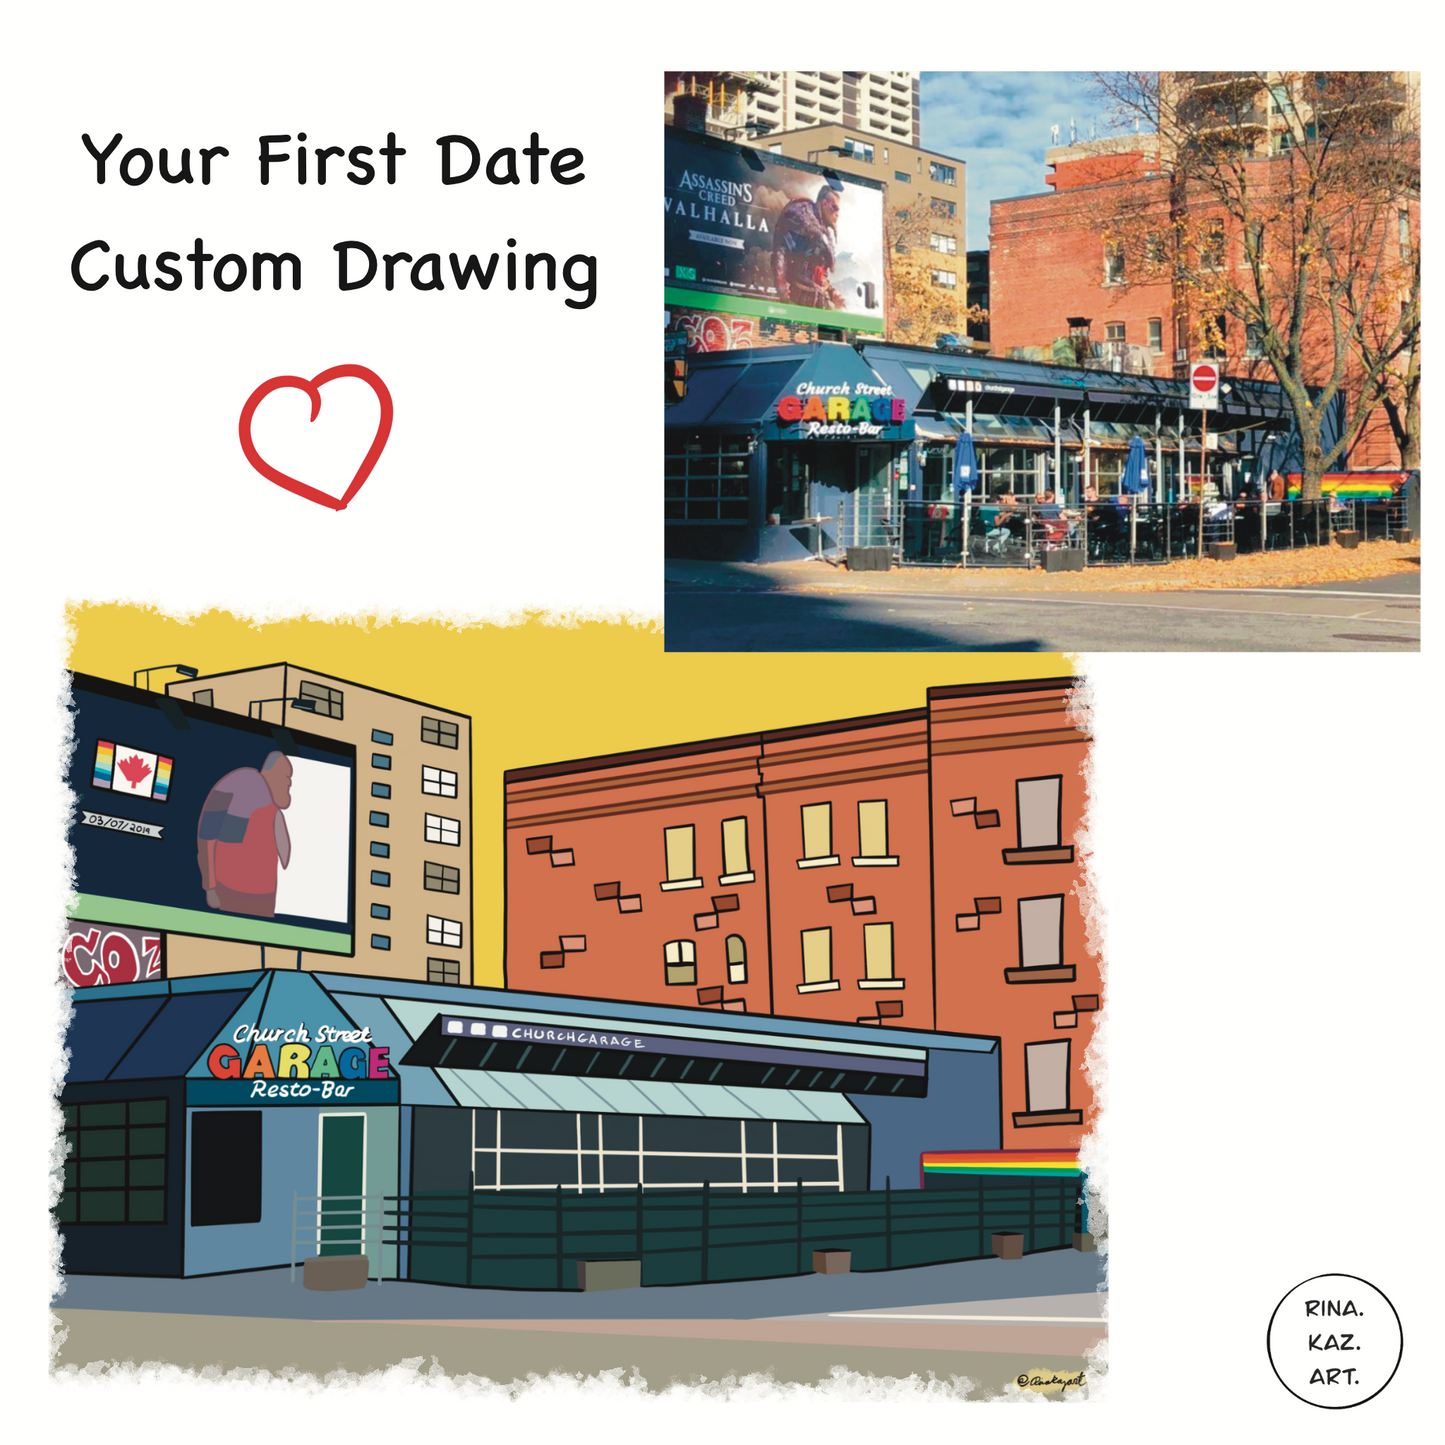 Your First Date Custom Digital Drawing